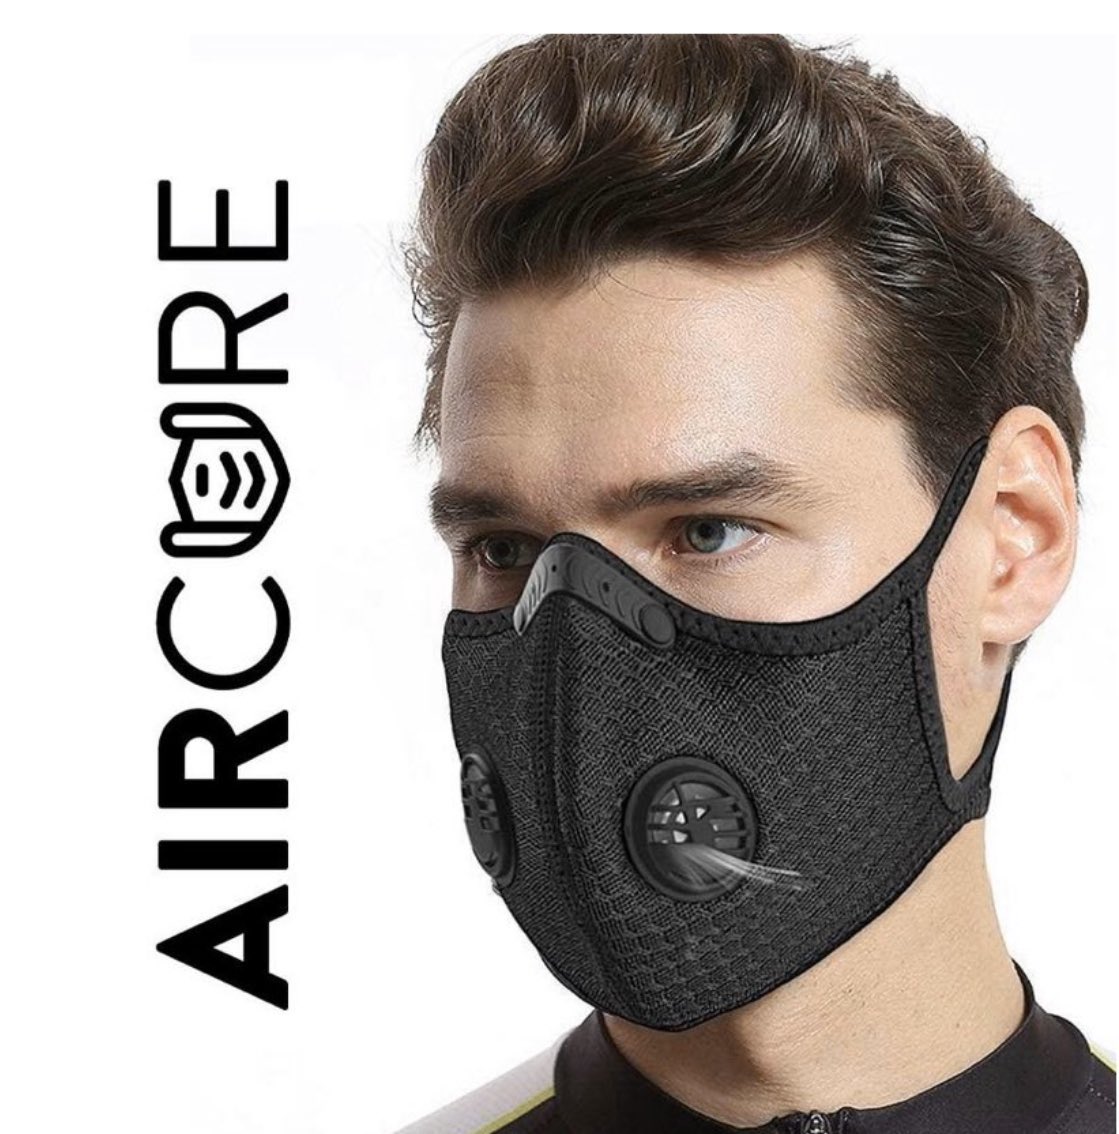 Stop The Spread with These Masks!! They’re 70 OFF RN ONLY http://Virguards.com 